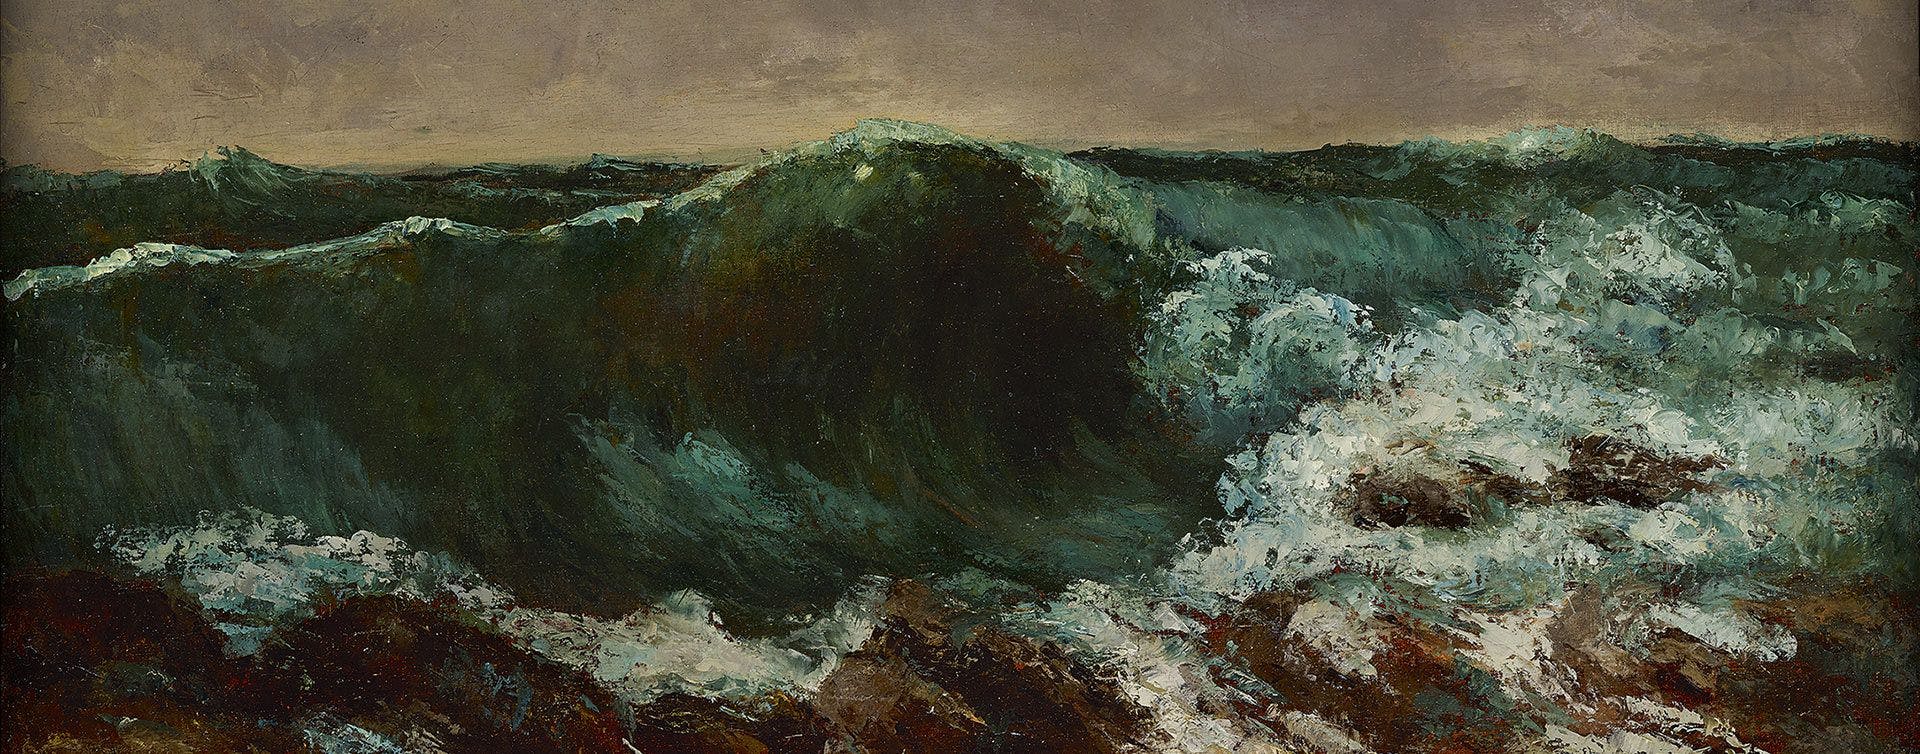 A detail from a painting by Gustave Courbet, titled The Wave (La Vague), dated c. 1869-1870.